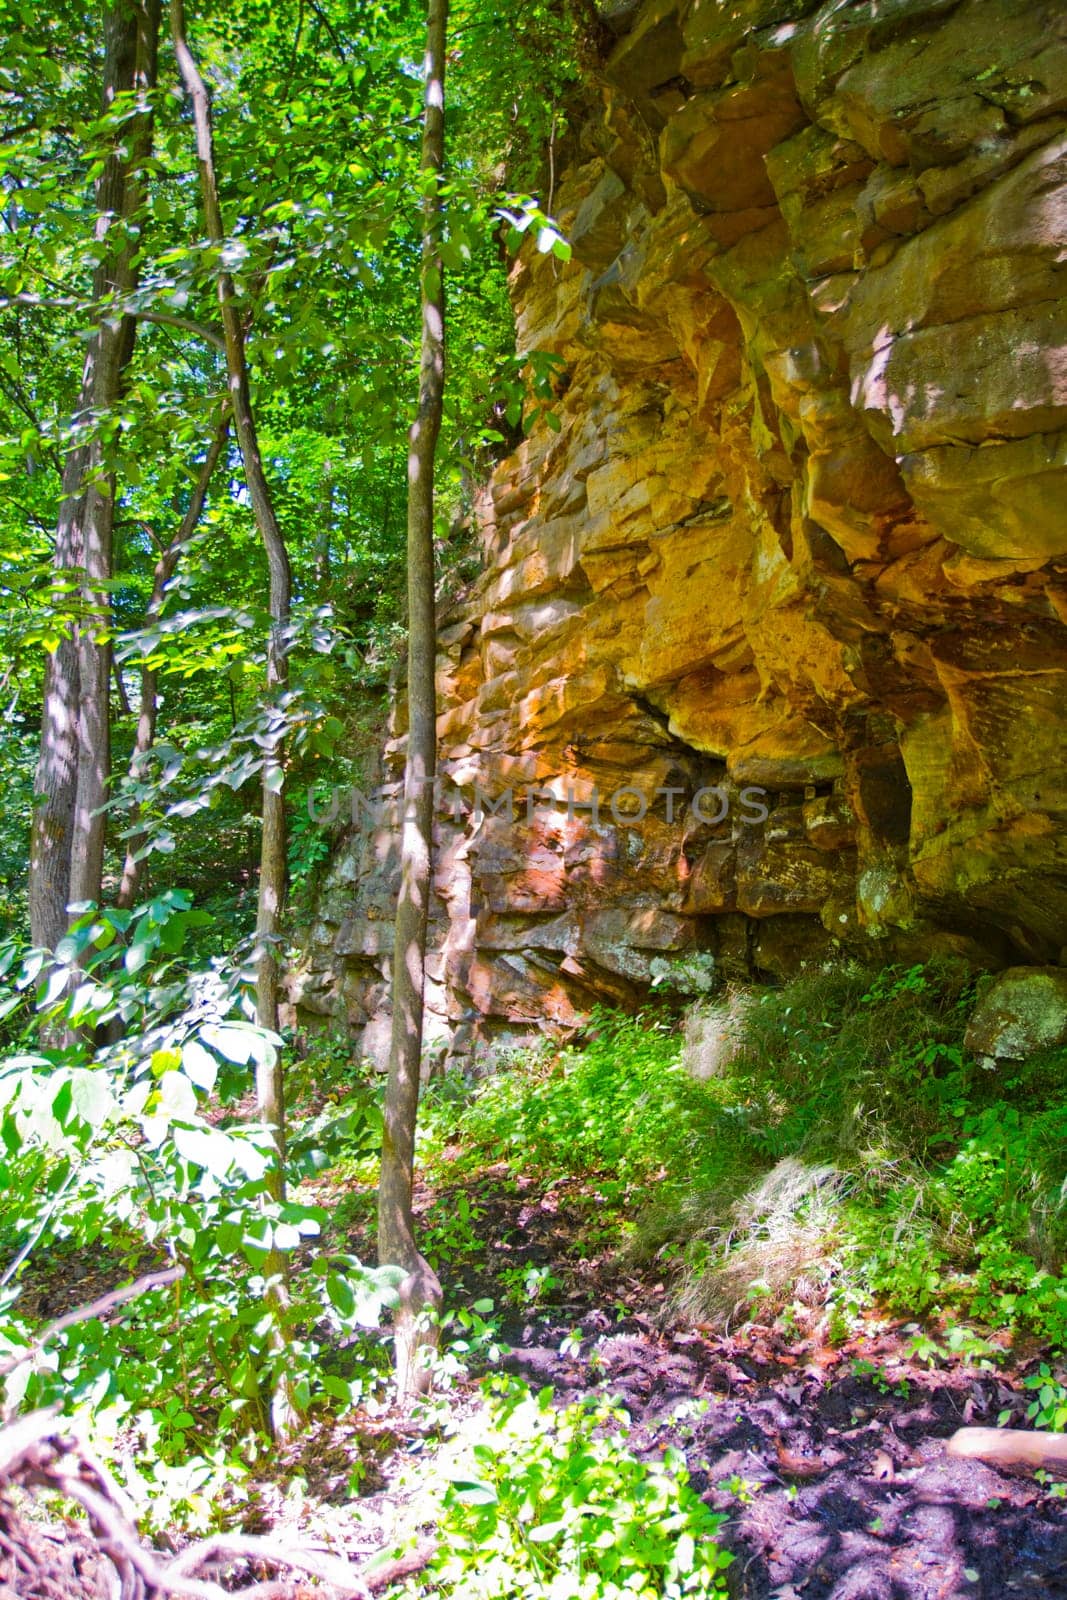 Daylit Forest and Sedimentary Rock Formation in Fitzgerald County Park, Michigan by njproductions